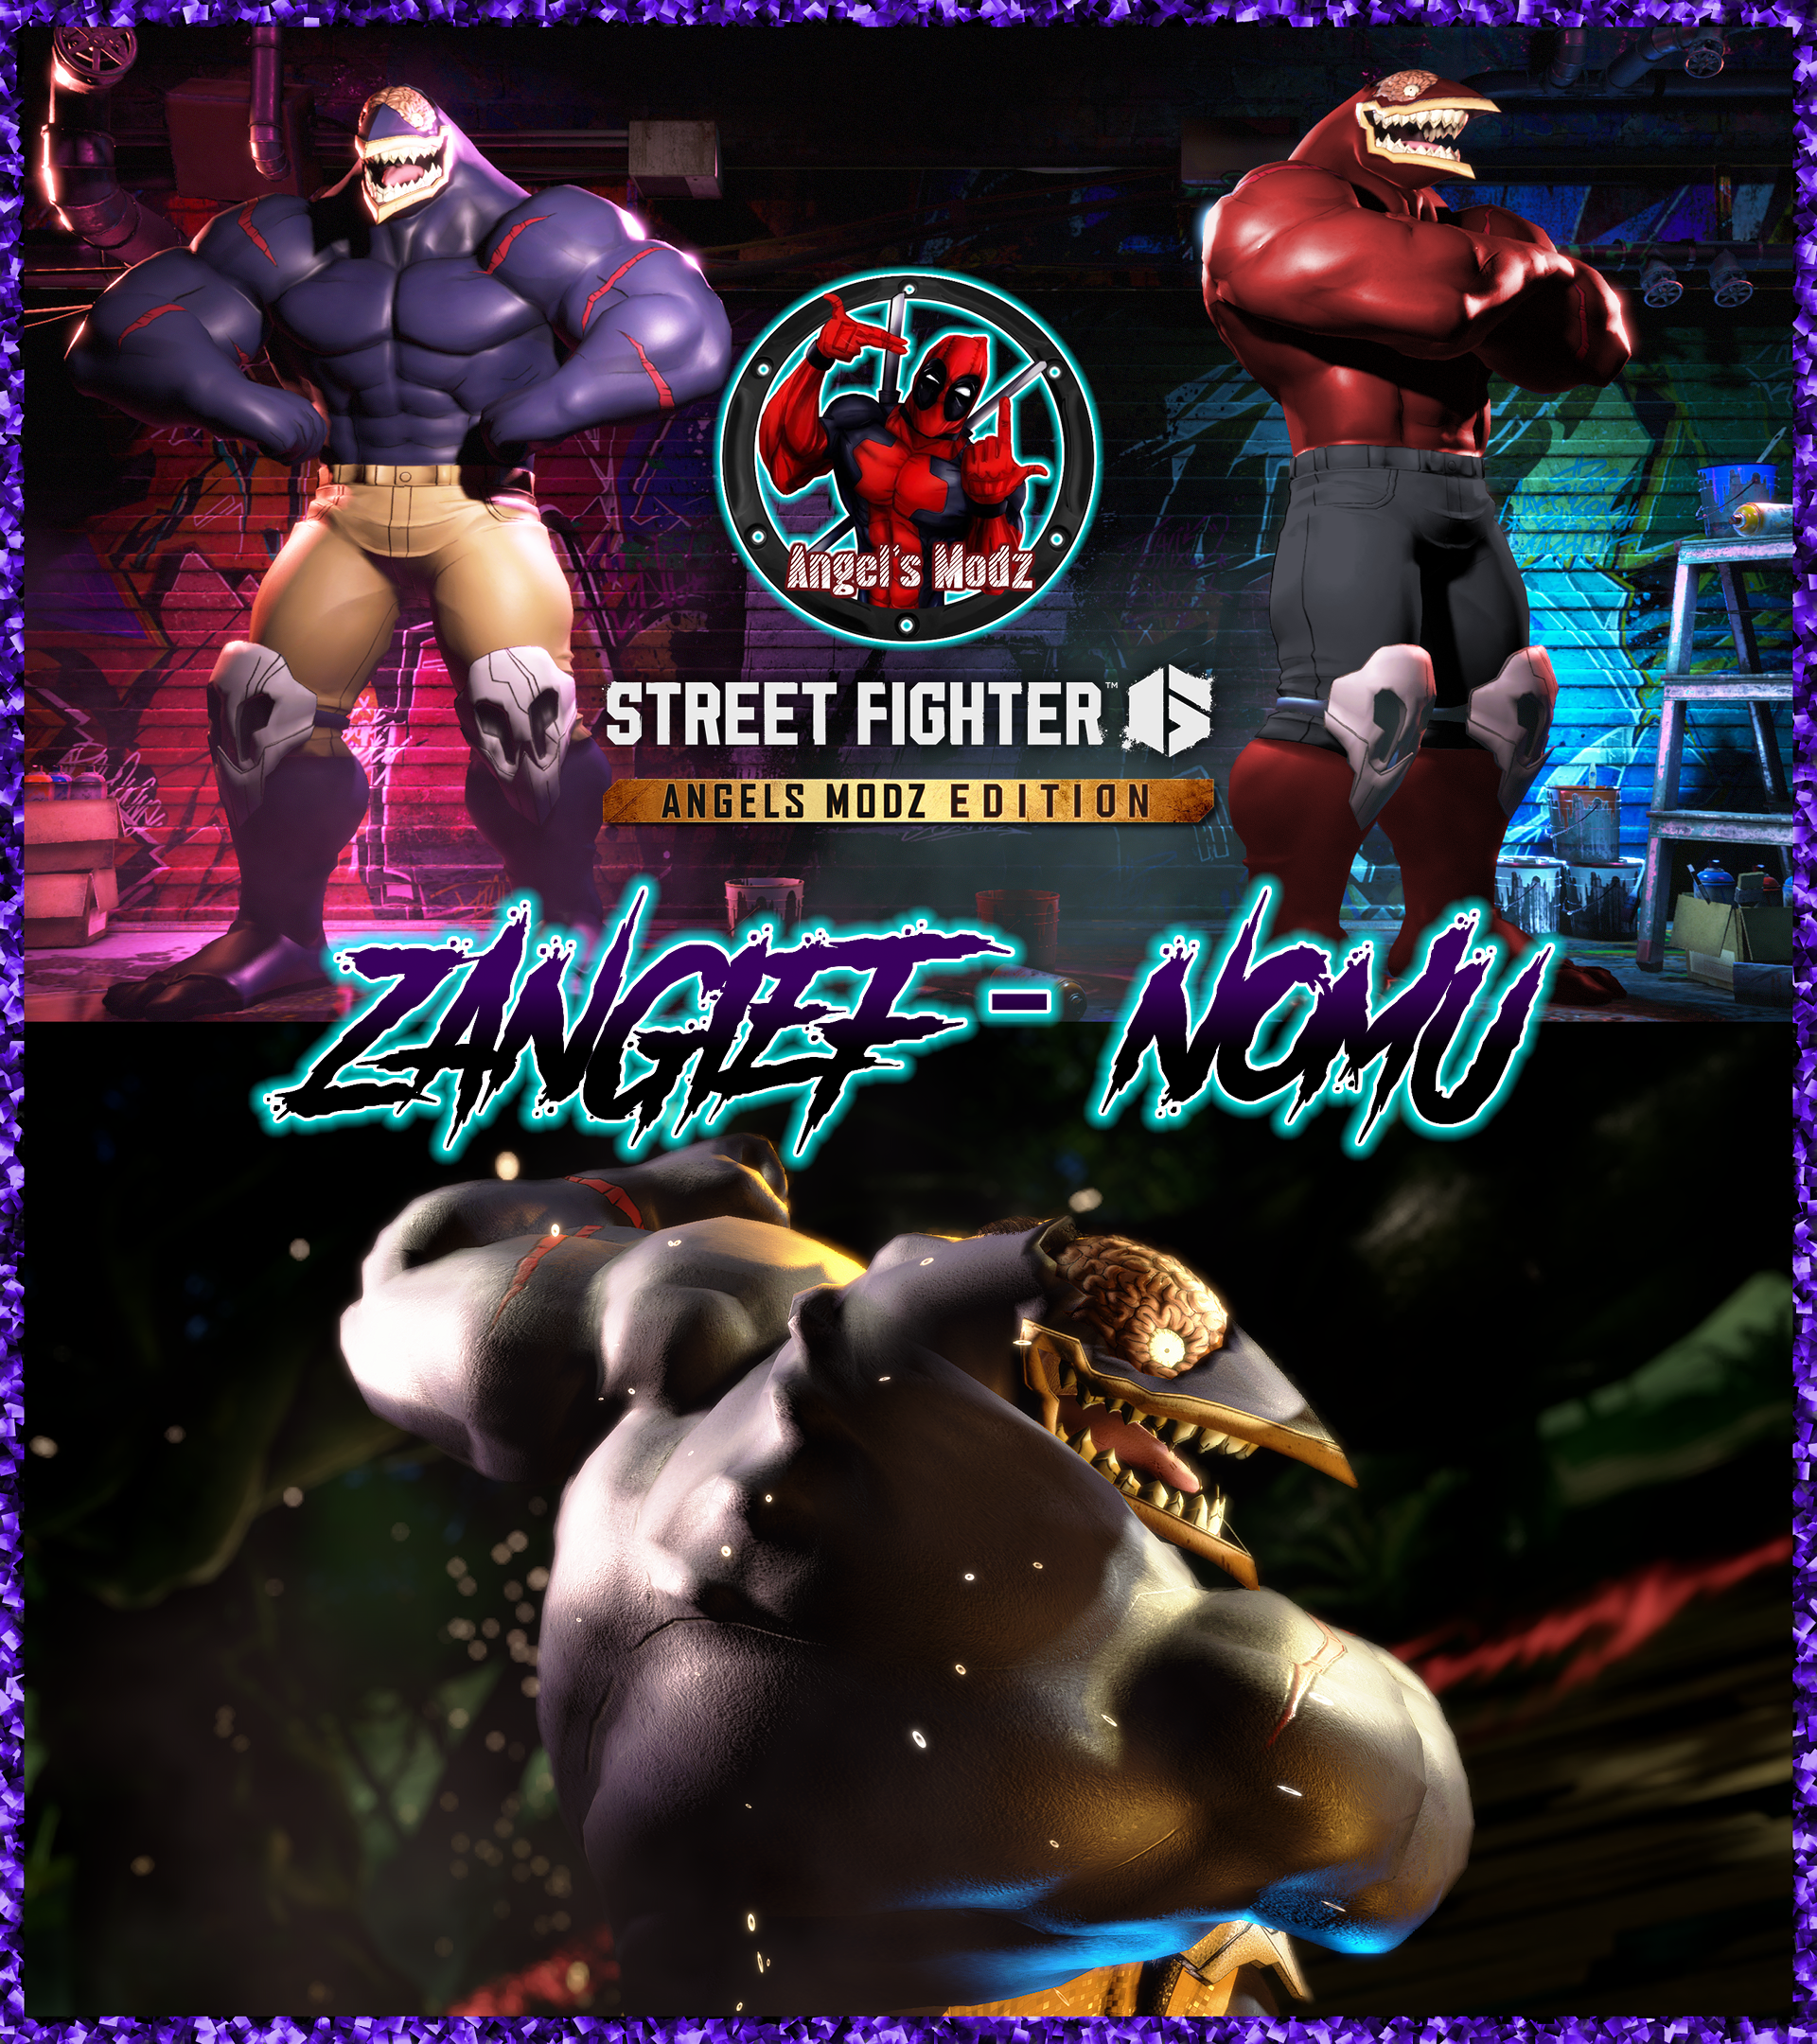 SF6 - Zangief #6 by NgTDat on DeviantArt